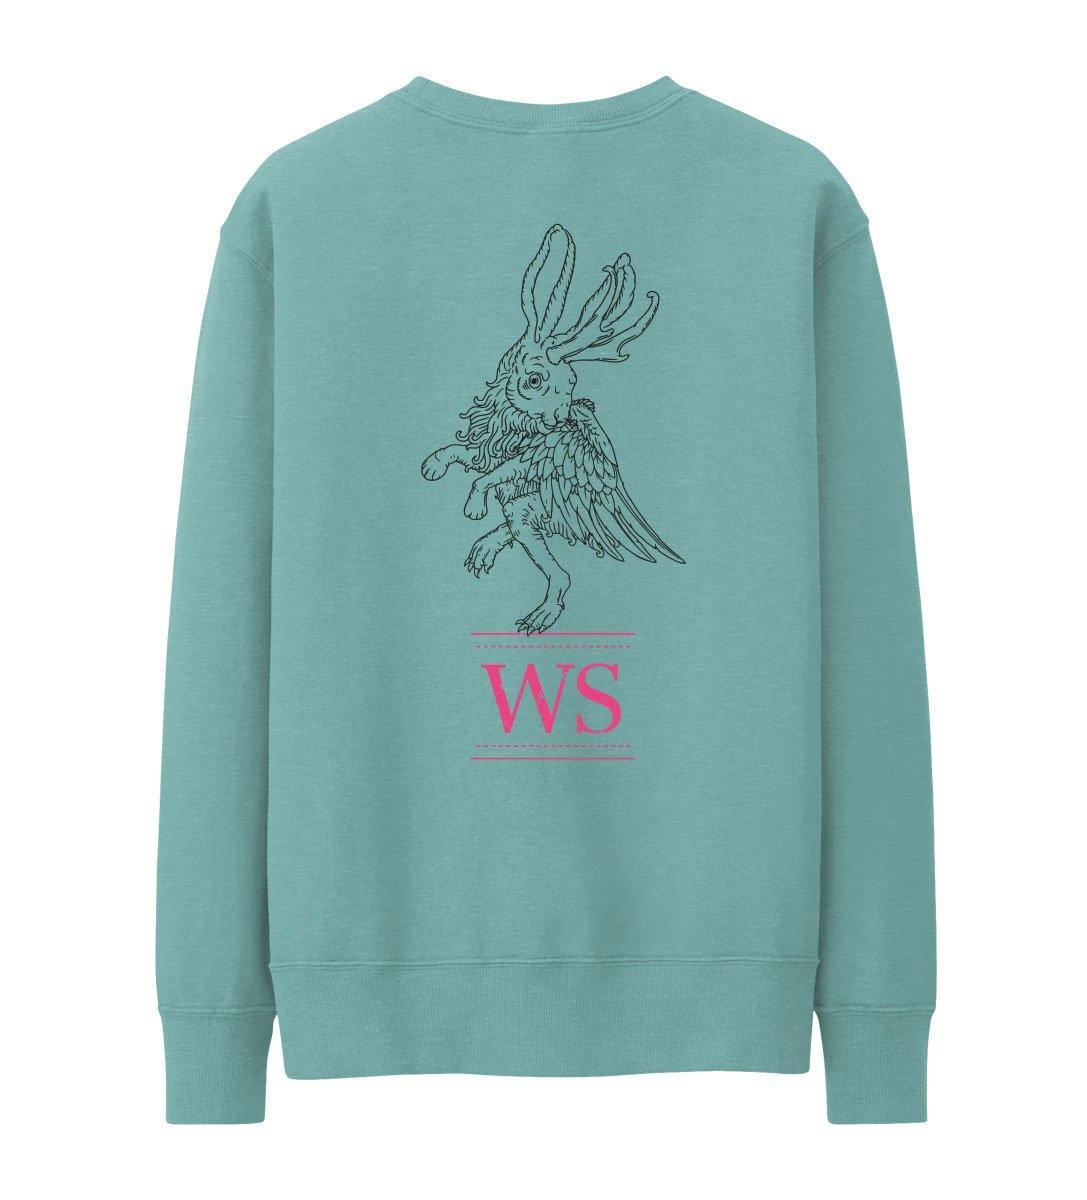 Sweater "Wolpertinger" - wise enough